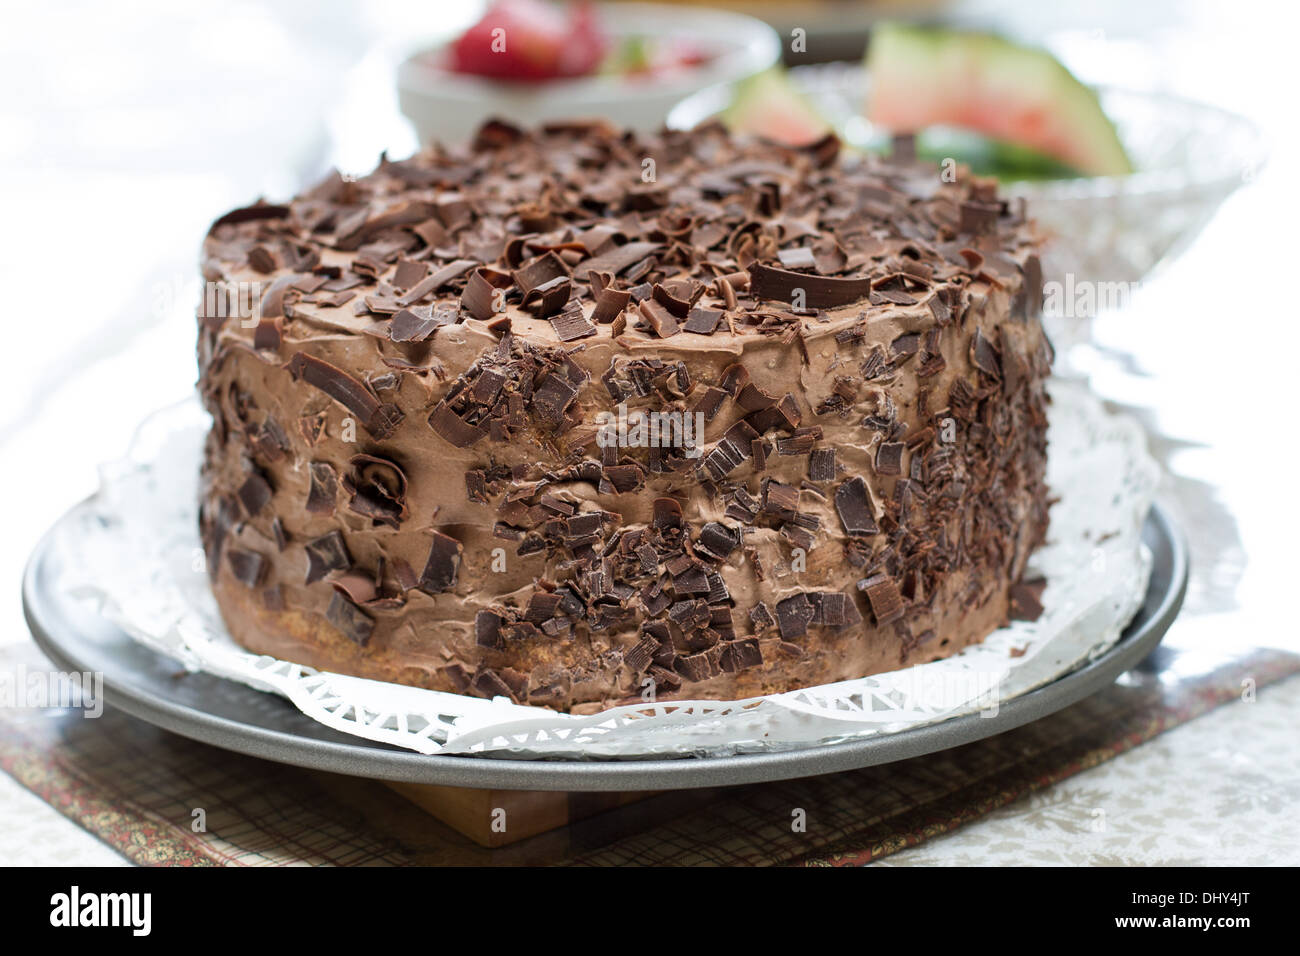 Delicious German Chocolate Cake served with fresh fruit Stock Photo